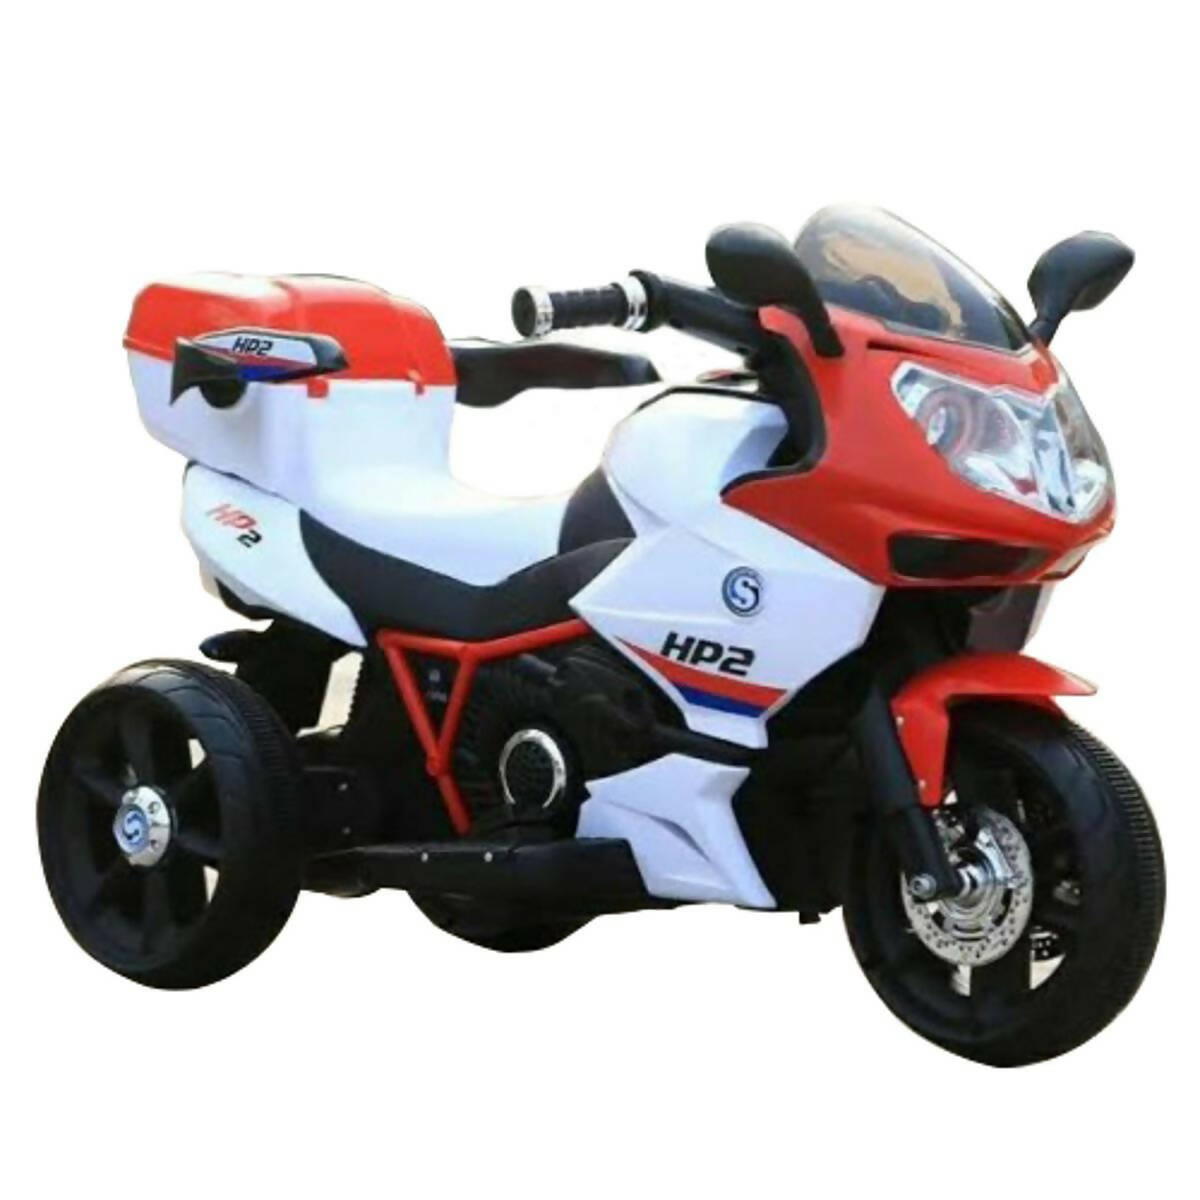 Rechargeable bike for Kids - HP2